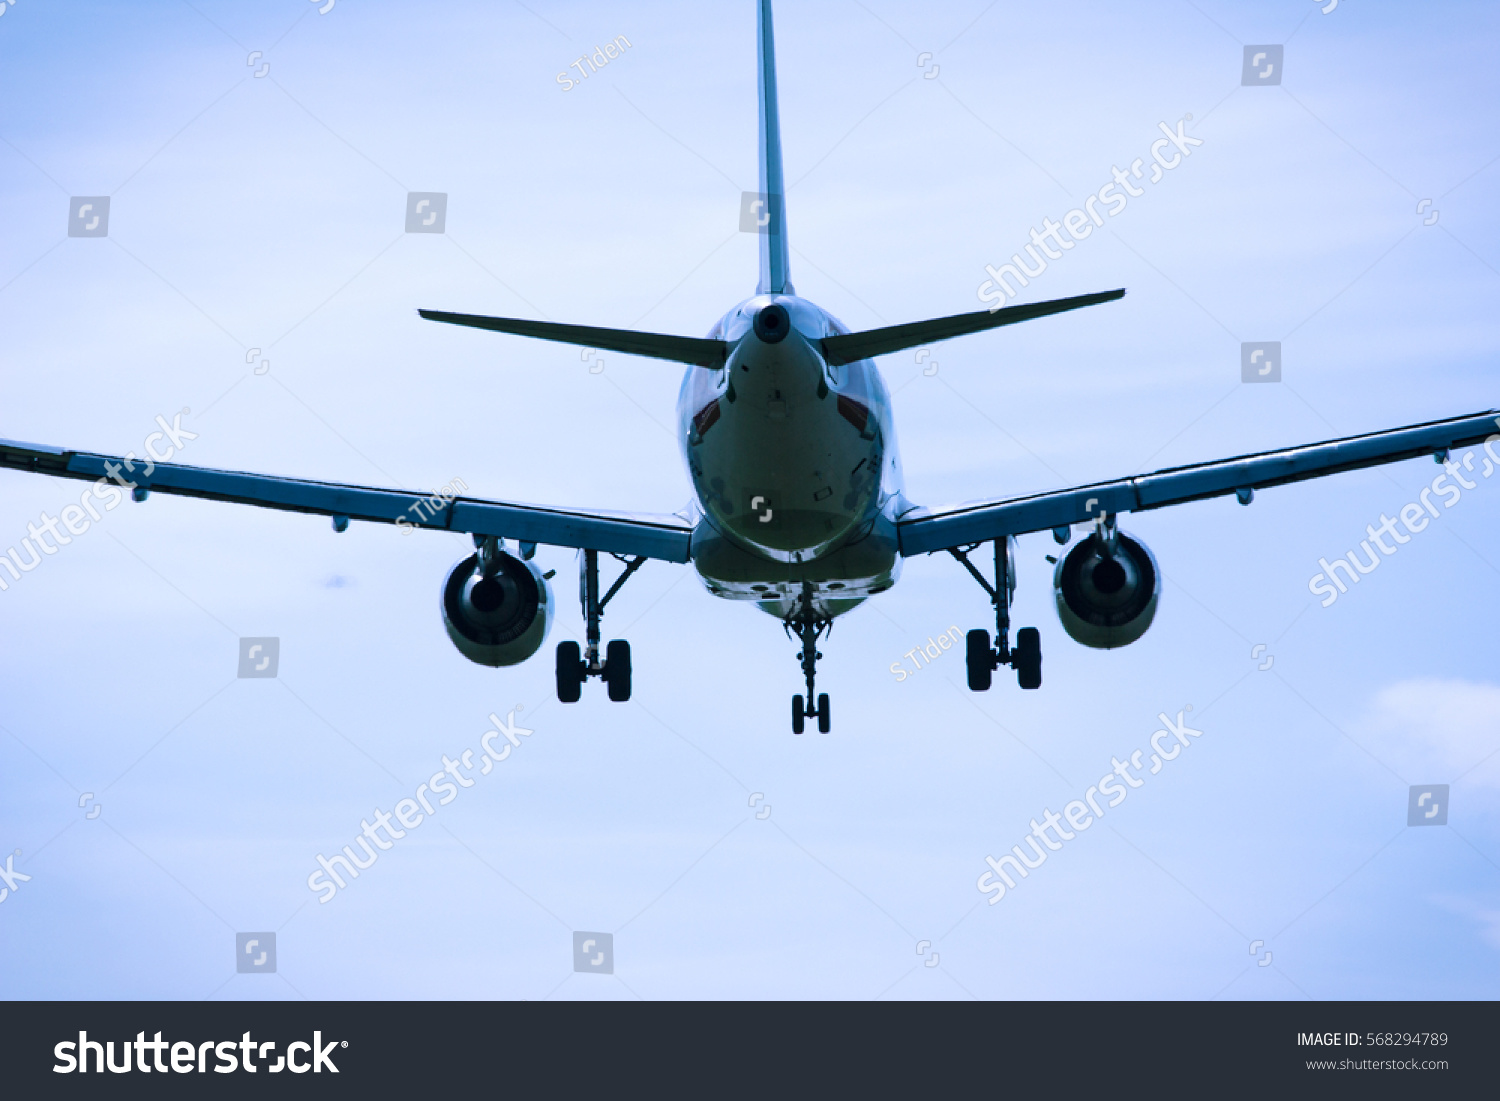 stock-photo-flying-jet-aircraft-in-the-sky-rear-view-close-up-568294789.jpg